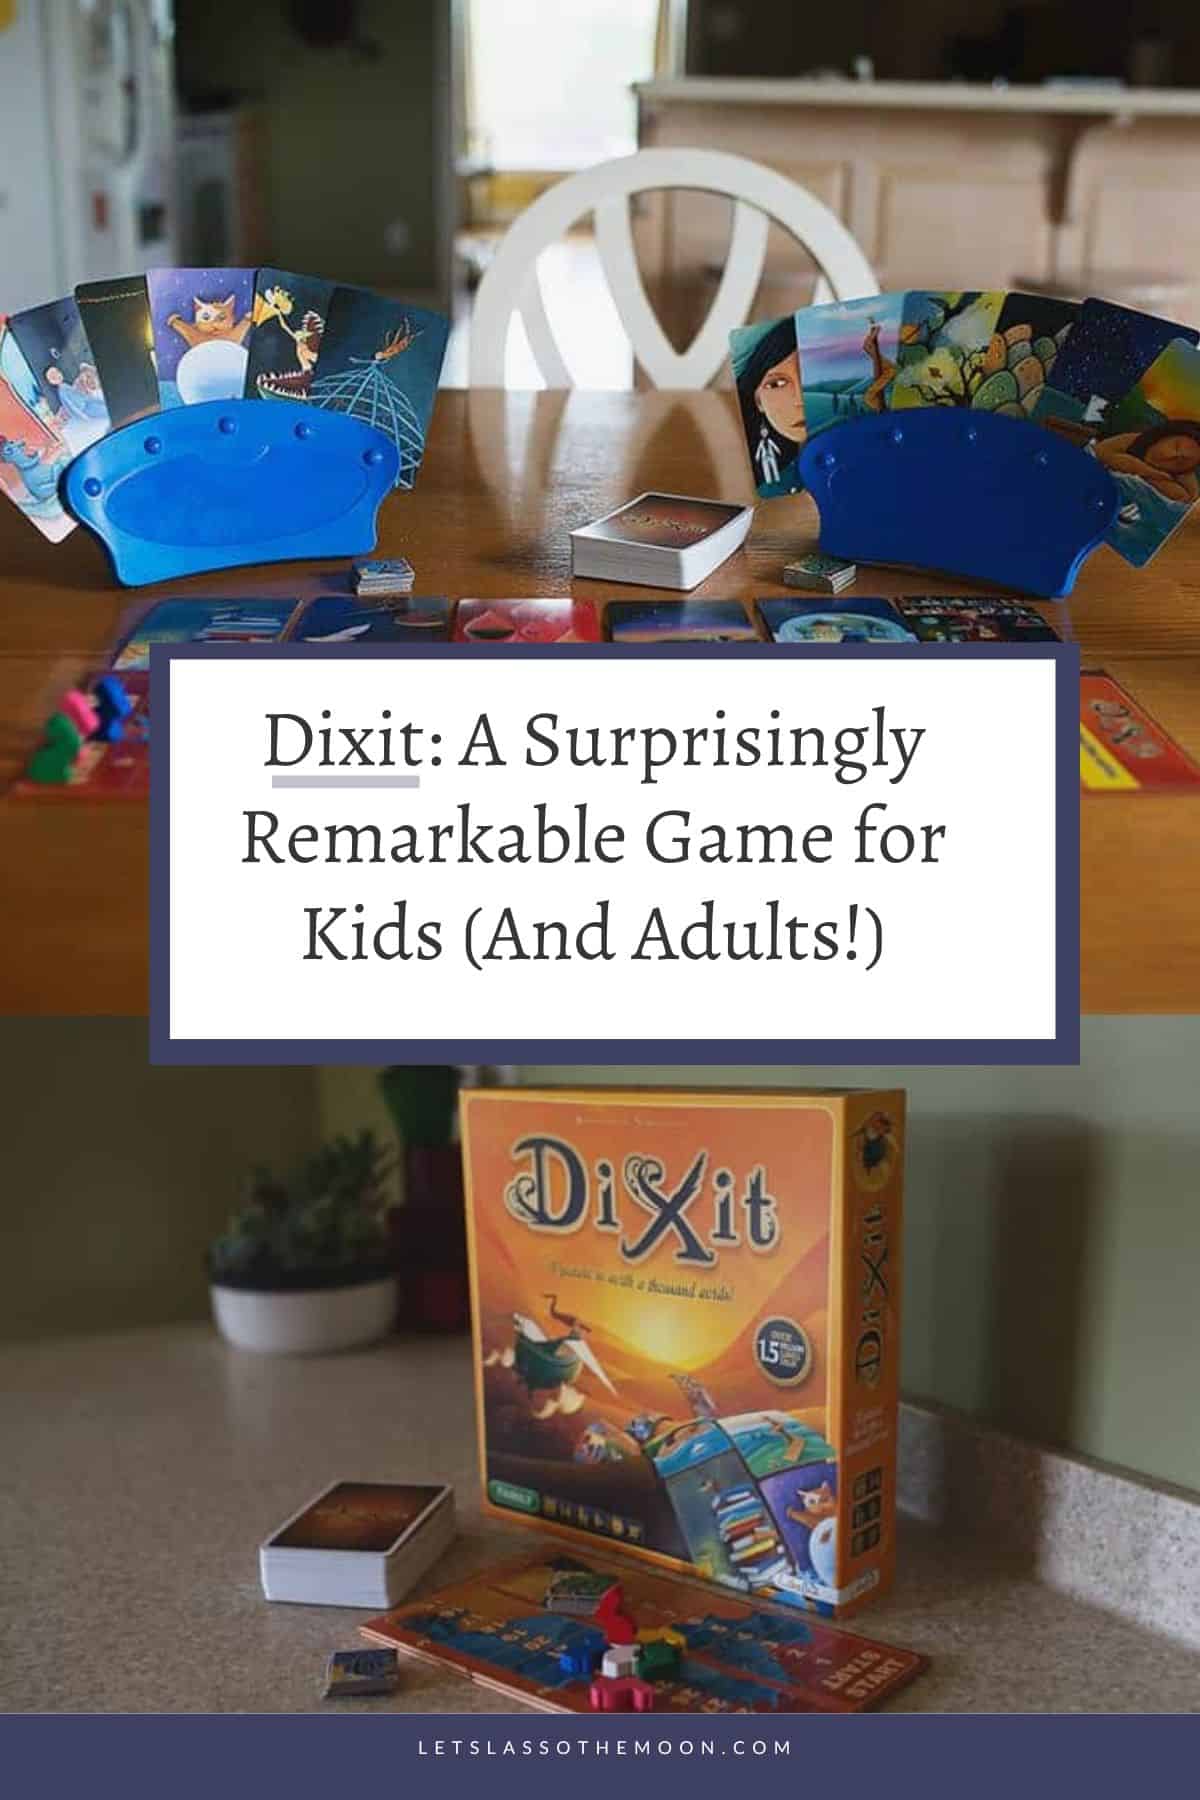 The Dixit game set up at a table for two.